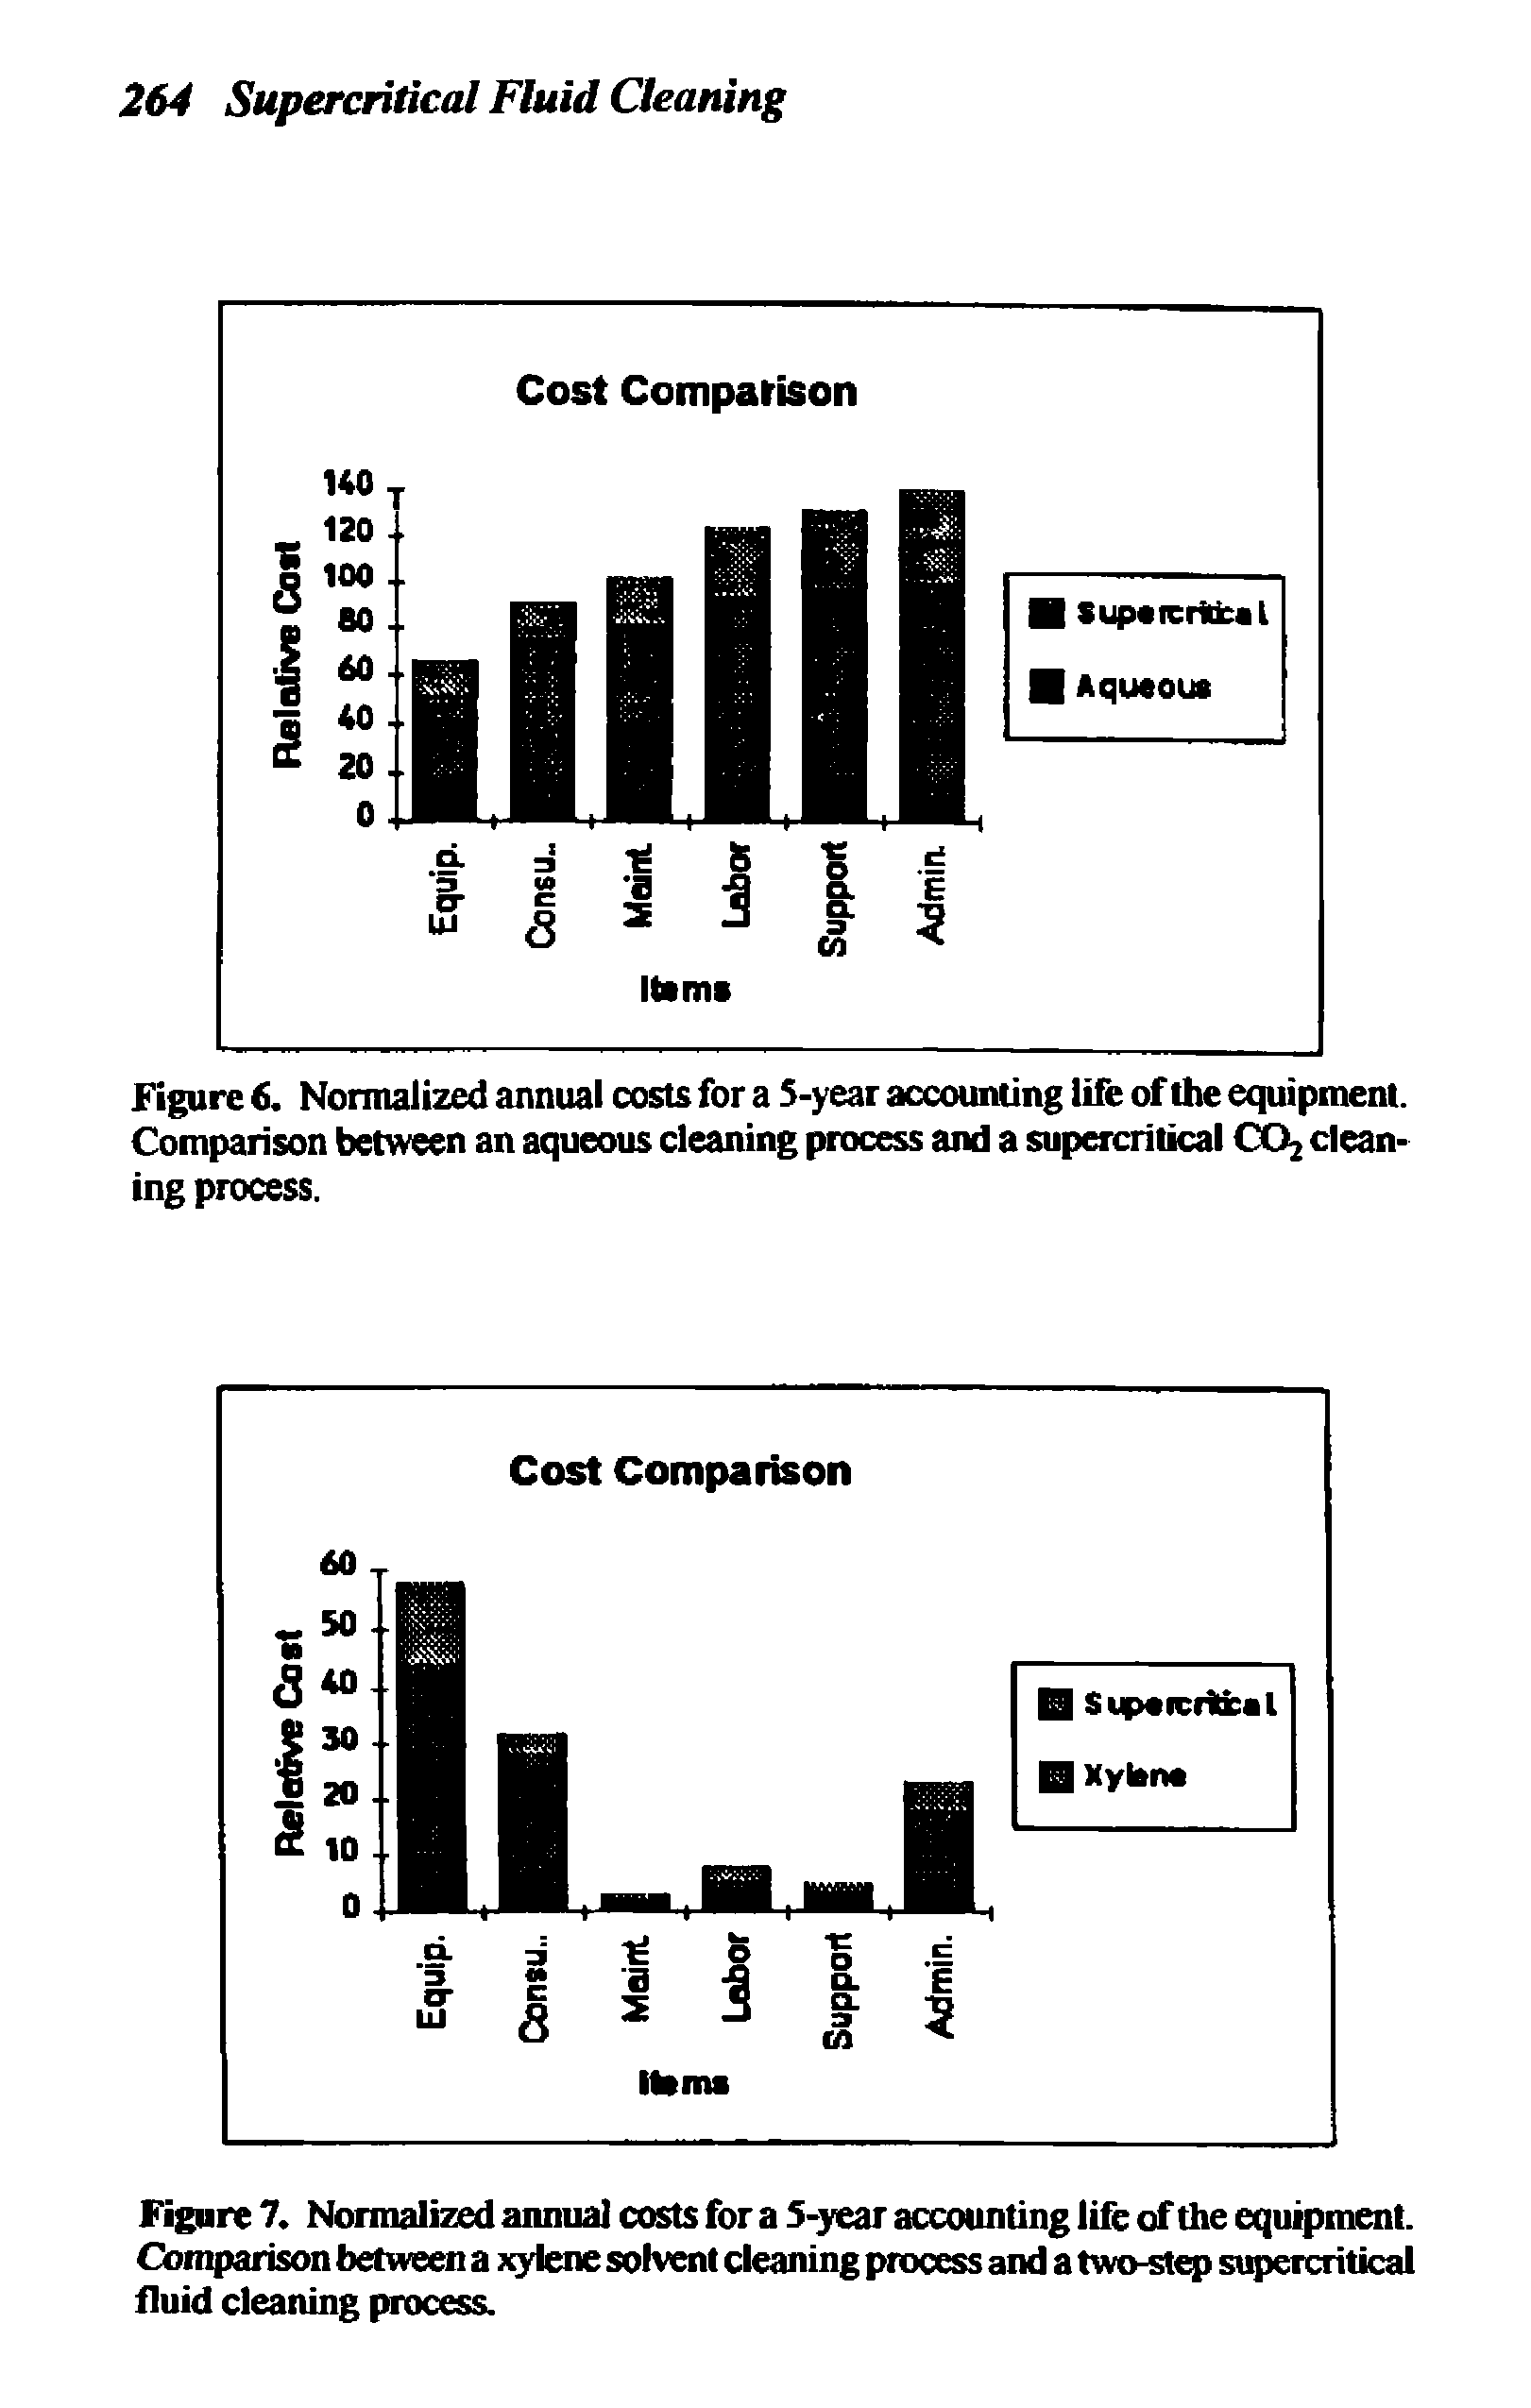 Figure 6, Normalized annual costs for a S-year accounting life of the equipment. Comparison between an aqueous cleaning process and a supercritical (X>2 cleaning process.